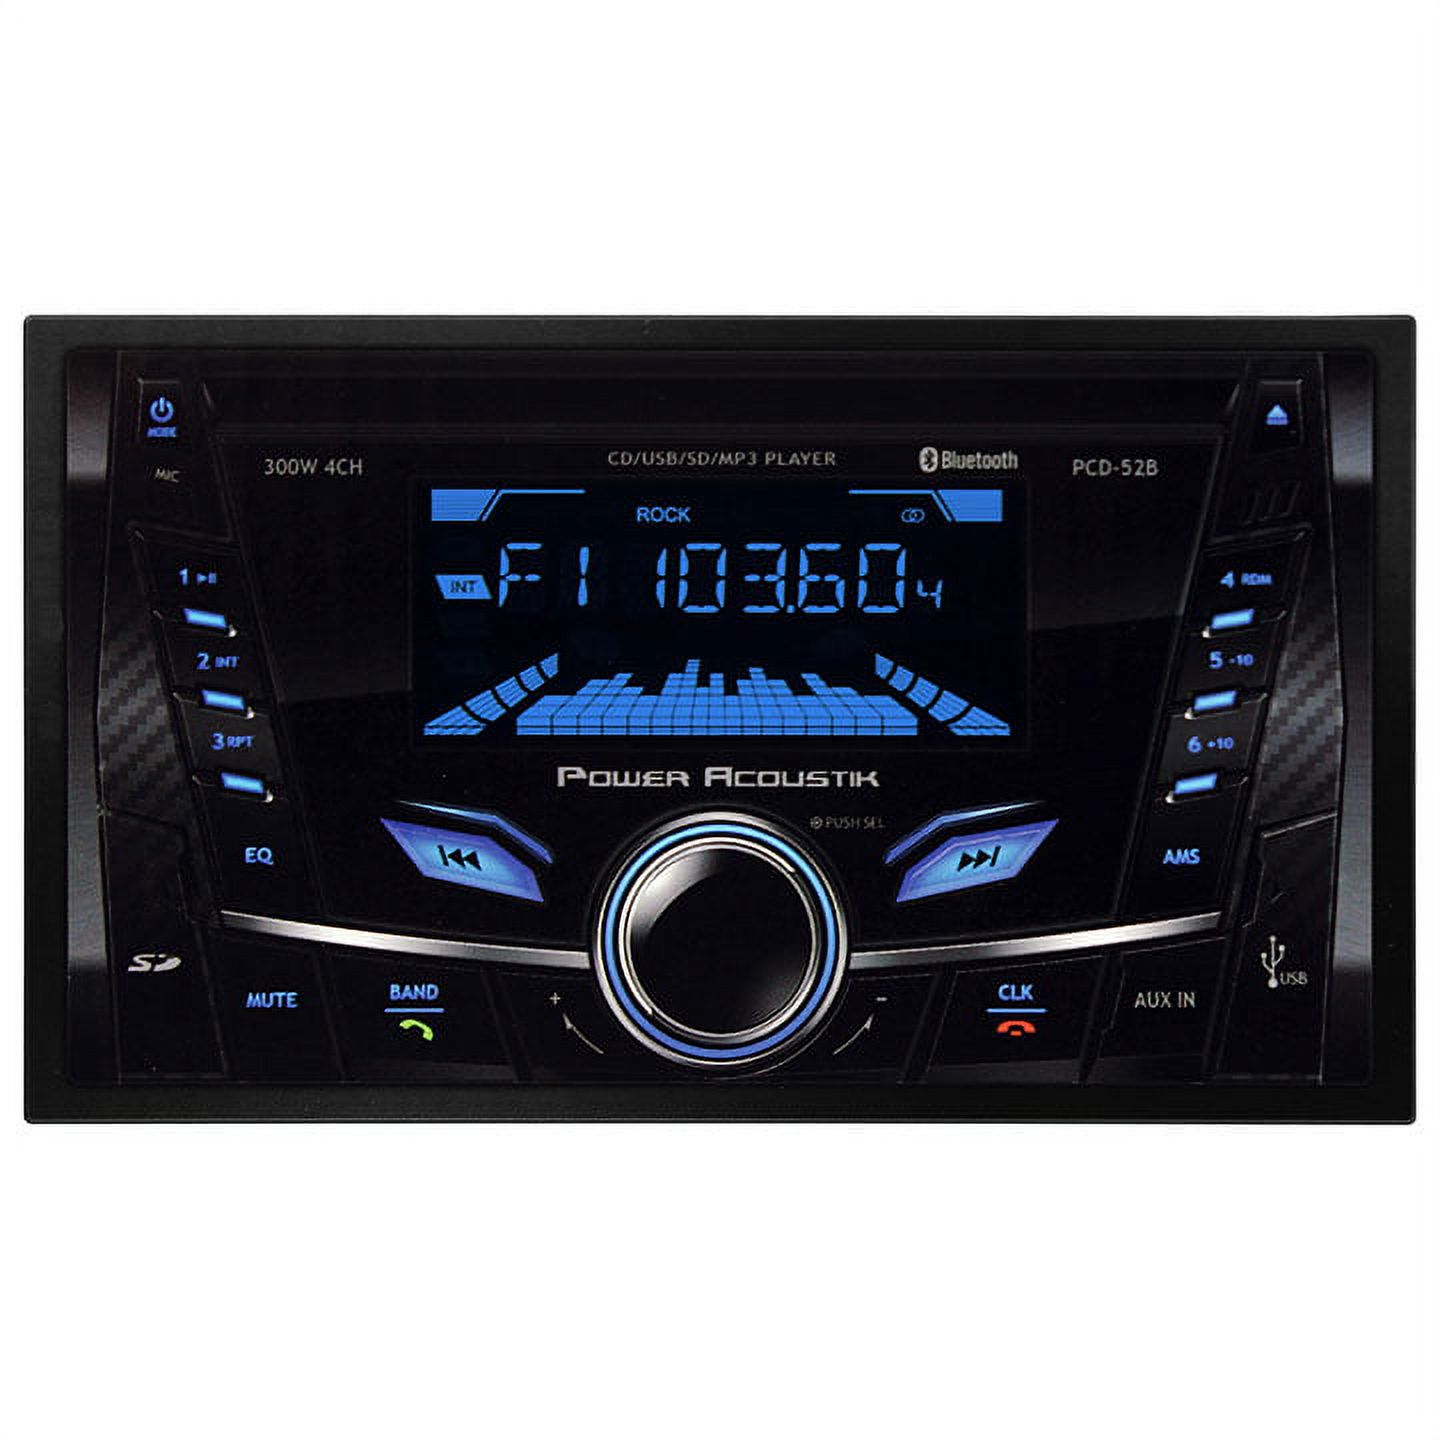 Power Acoustik PCD-52B Double-DIN In-Dash CD-MP3 AM-FM Receiver with Bluetooth and USB Playback, Black - image 4 of 4